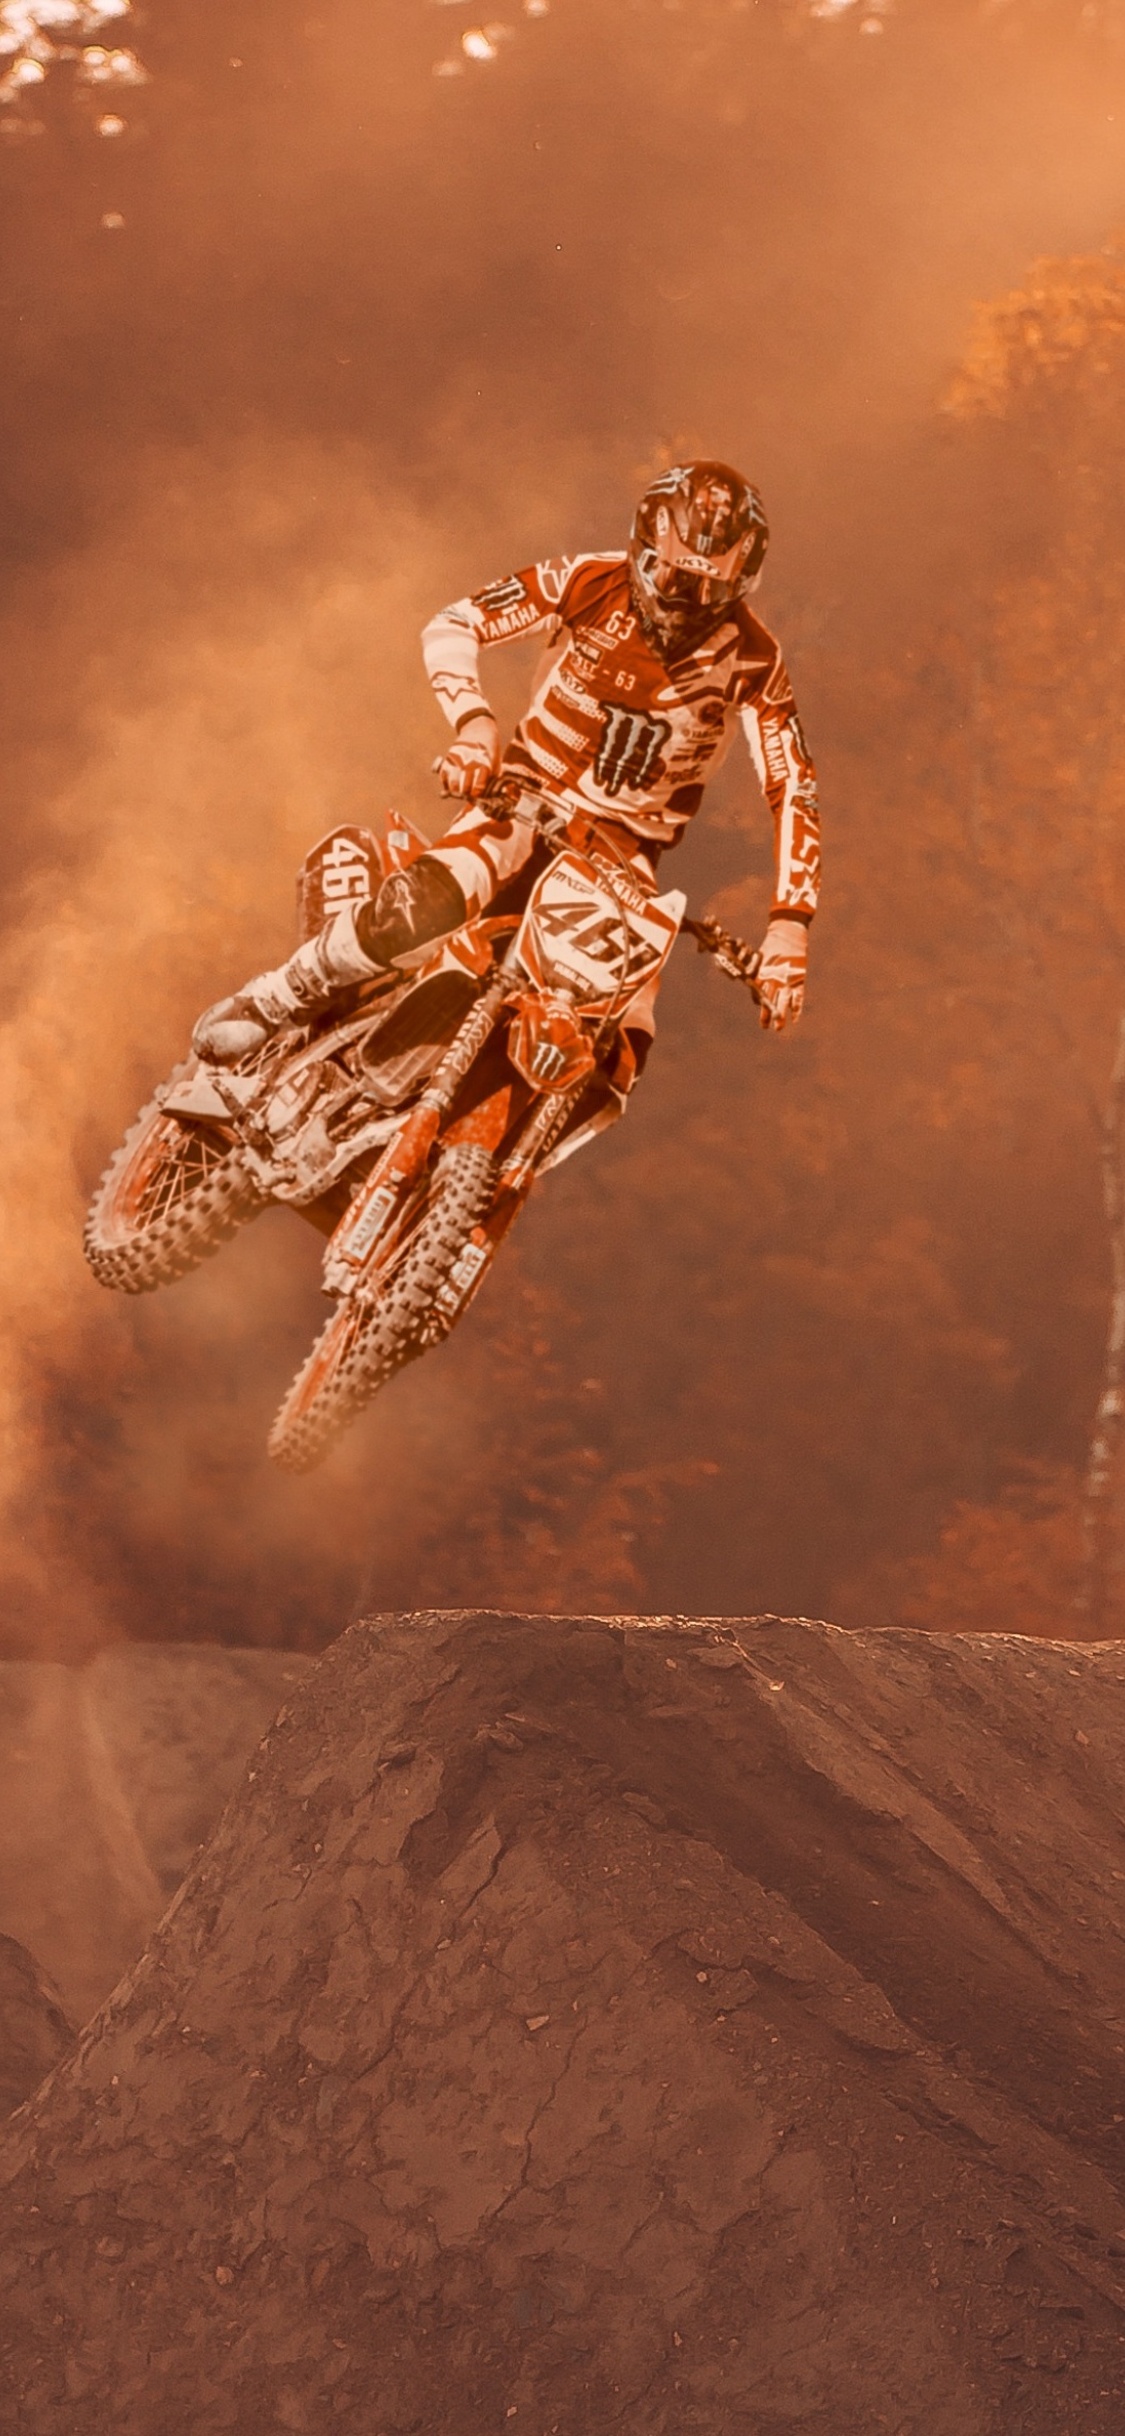 extreme sports 1080P 2k 4k HD wallpapers backgrounds free download   Rare Gallery